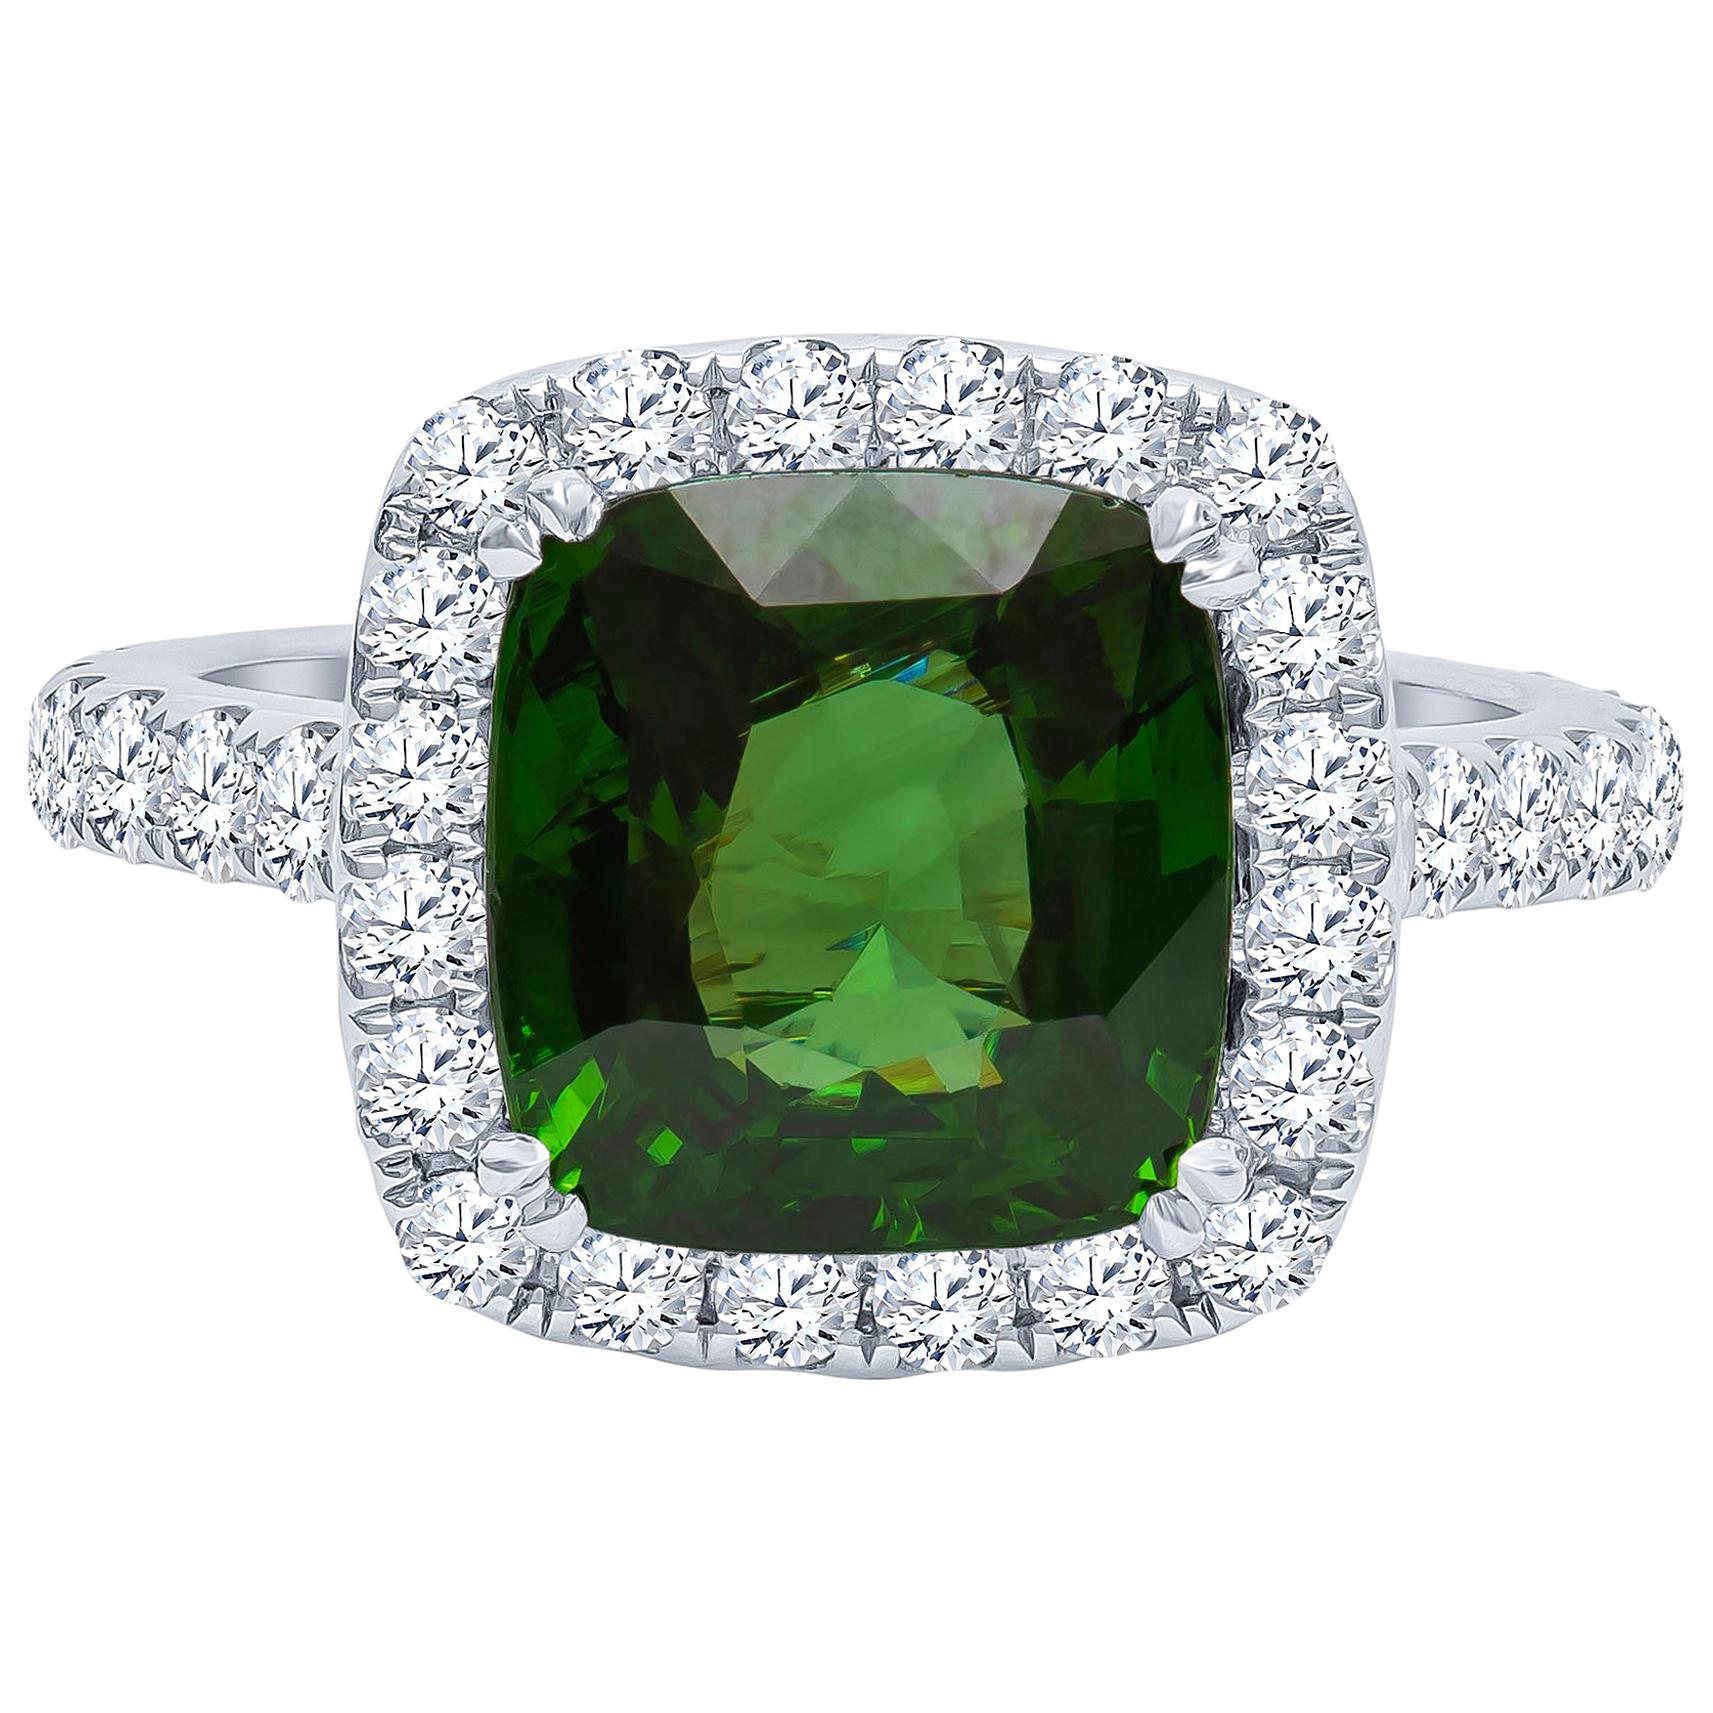 5.42 Carat Cushion Cut Green Zircon Ring with 0.52 Carat Total Diamond Halo For Sale